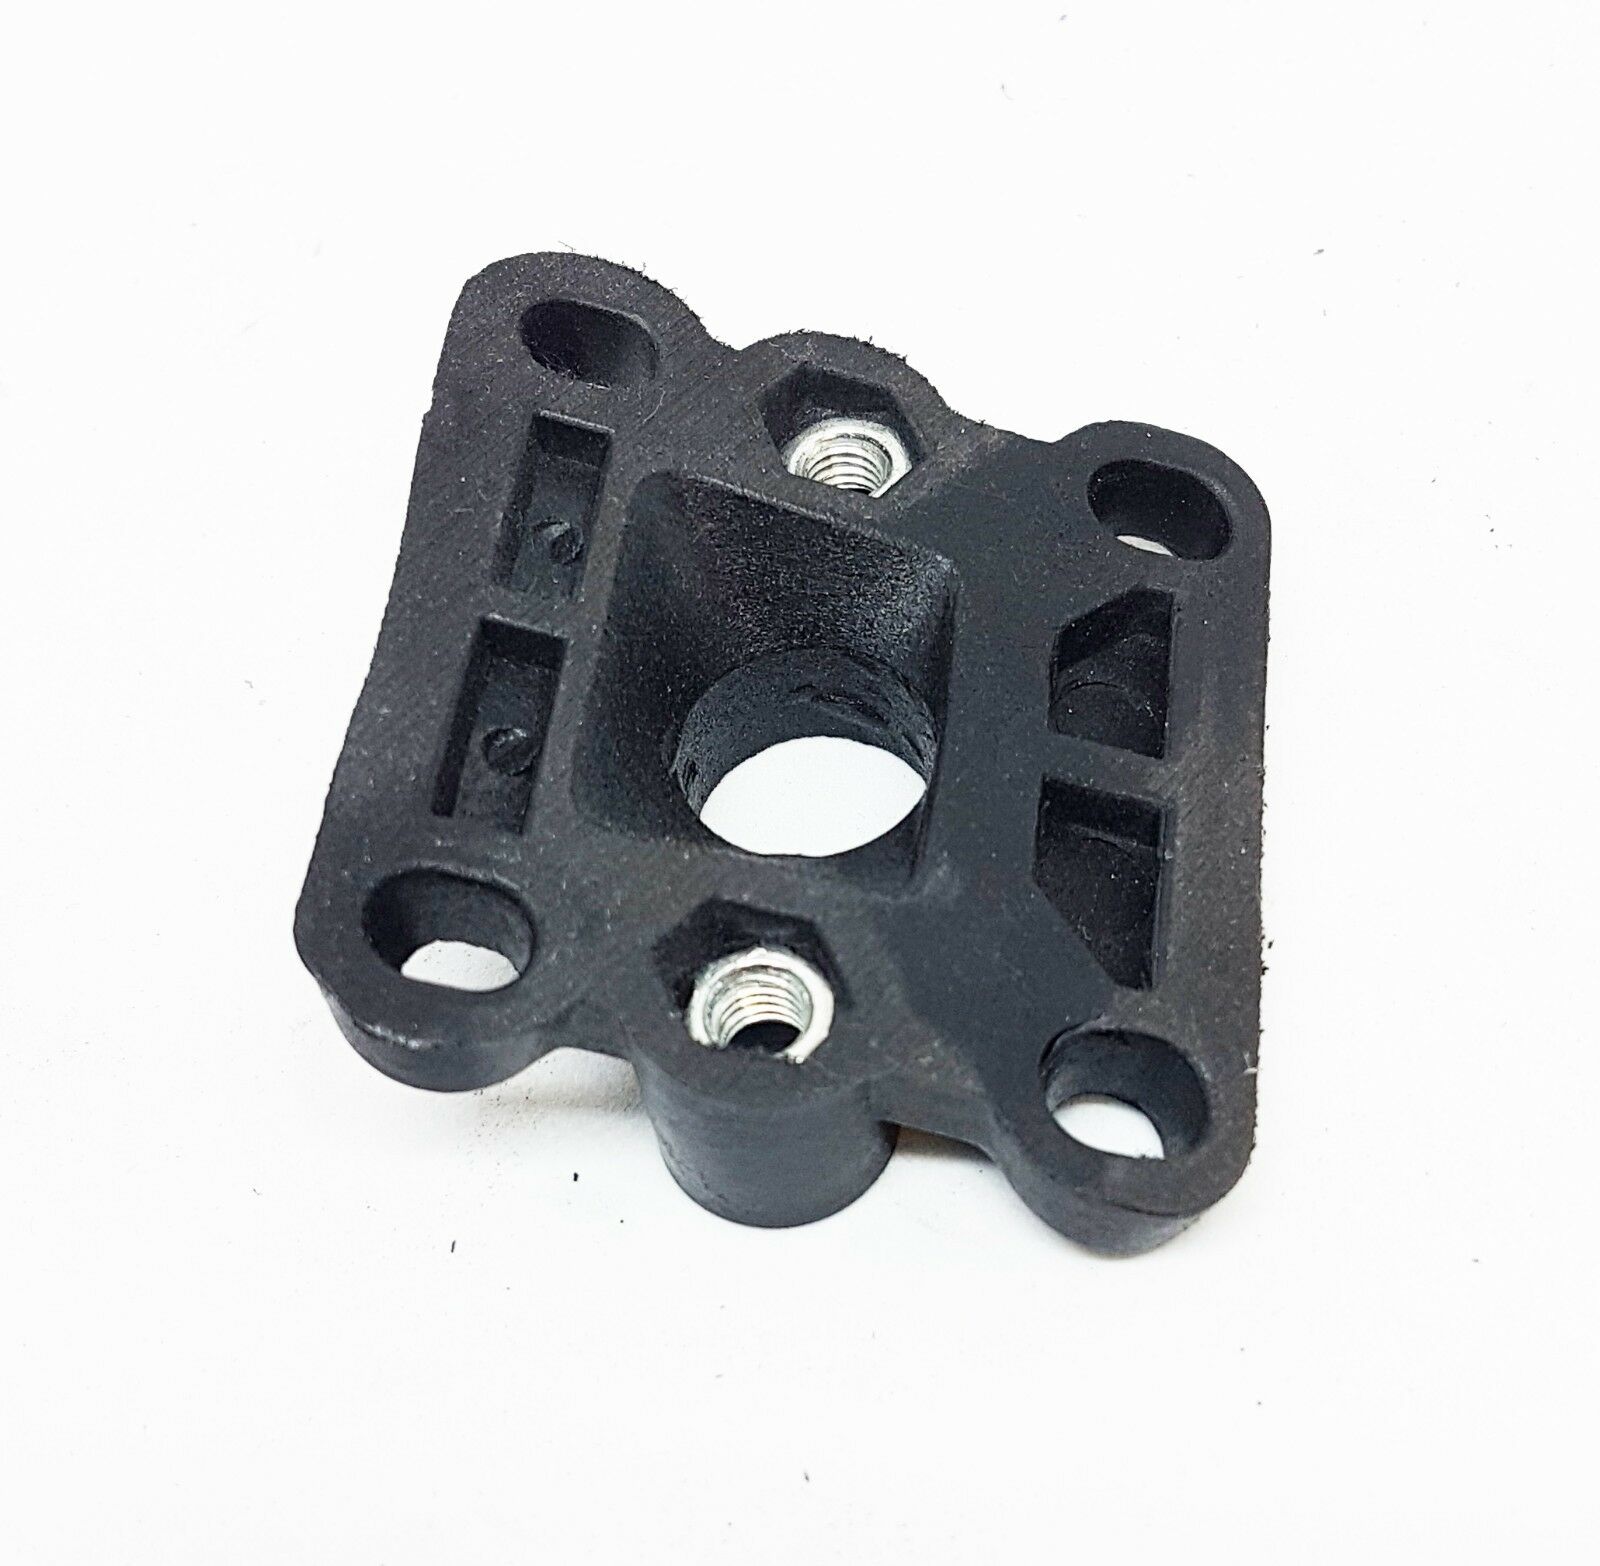 Load image into Gallery viewer, SET OF INLET MANIFOLD REEDS AND GASKETS FOR 47 - 49CC MINI MOTO / MINI DIRT / MINI QUAD BIKE
